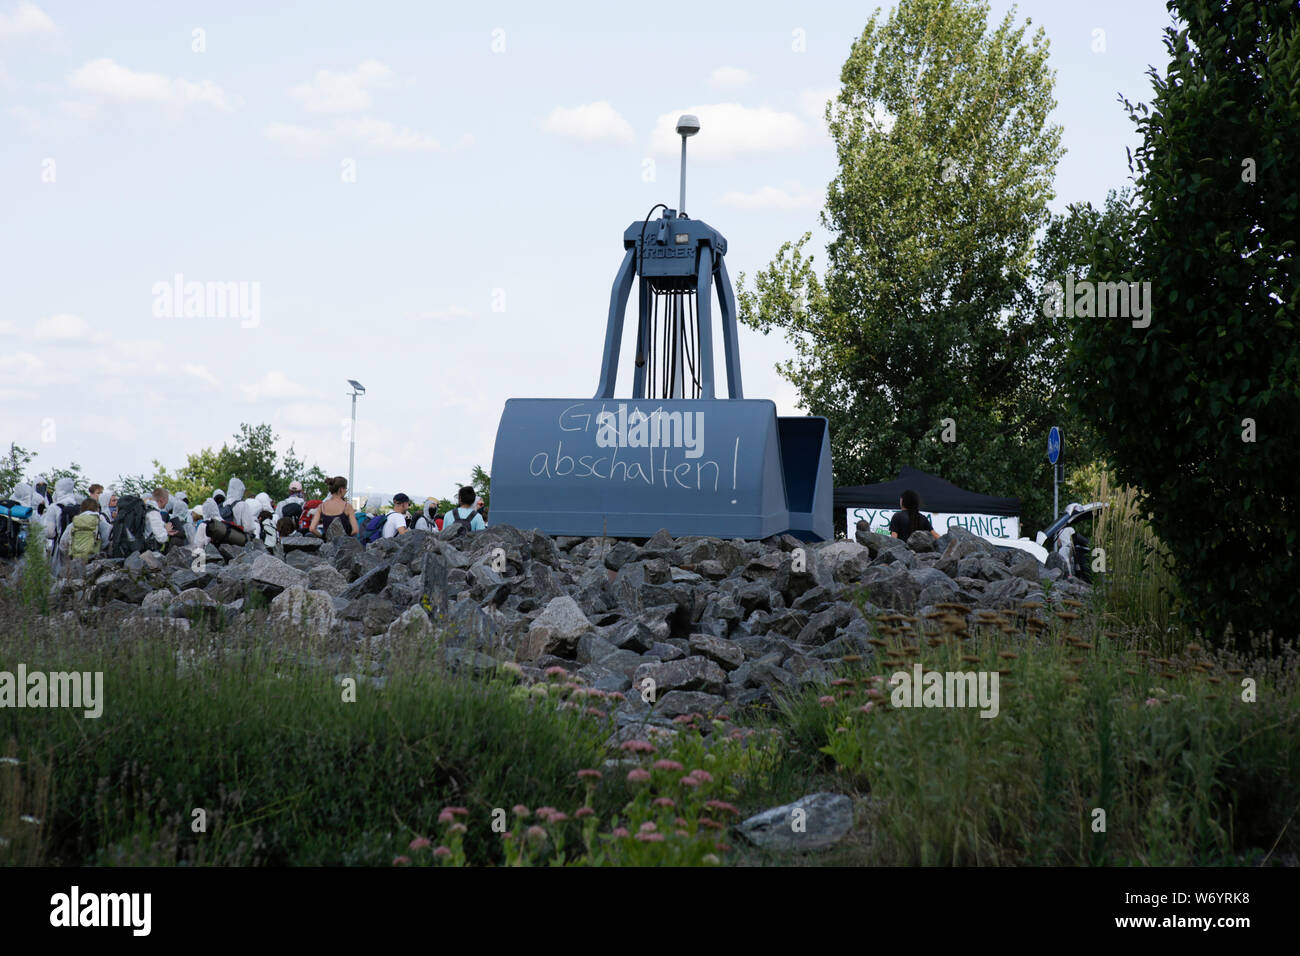 Mannheim, Germany. 3rd August 2019. 'Switch off Mannheim Power Plant' has been written on the excavator shovel that stands as a monument in front of the power plant. Activists from the Ende Gelande organisation have occupied the coal conveyor belt on the large coal power plant in Mannheim. They also block the main entrance of the plant, calling for an end to the use of coal in energy production and the use of renewable energy sources. Stock Photo